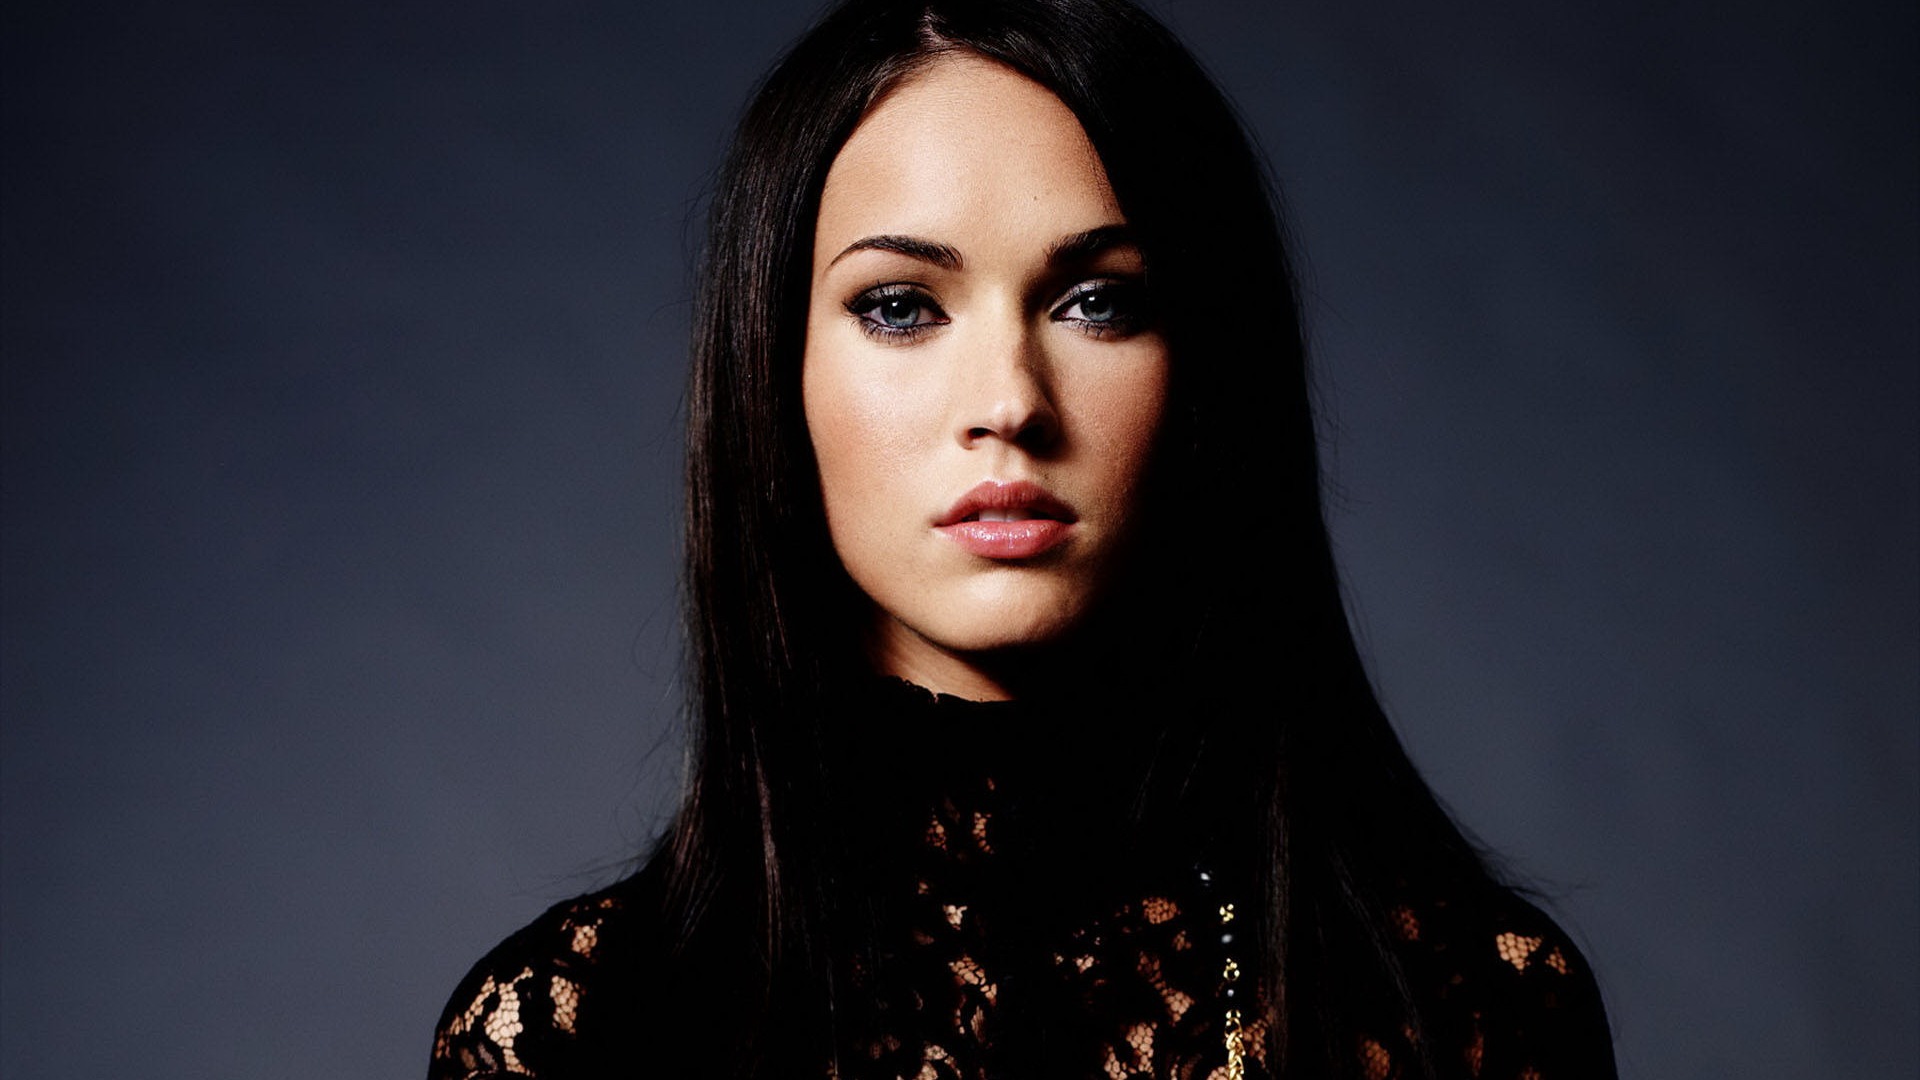 Megan Fox #003 - 1920x1080 Wallpapers Pictures Photos Images